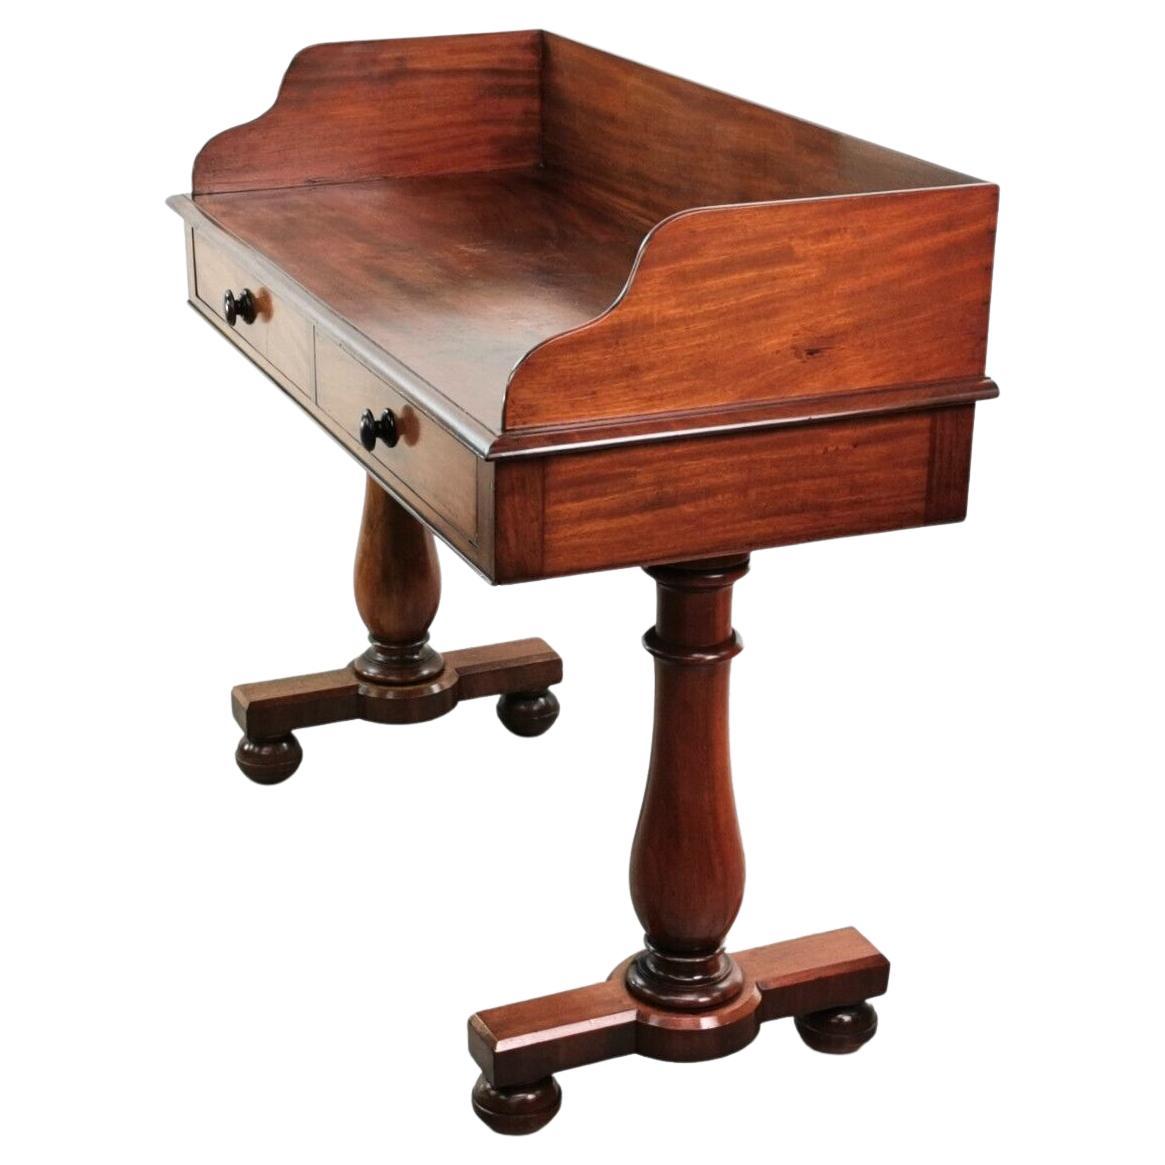 English Victorian Mahogany 19th Century Wash Stand or Desk For Sale